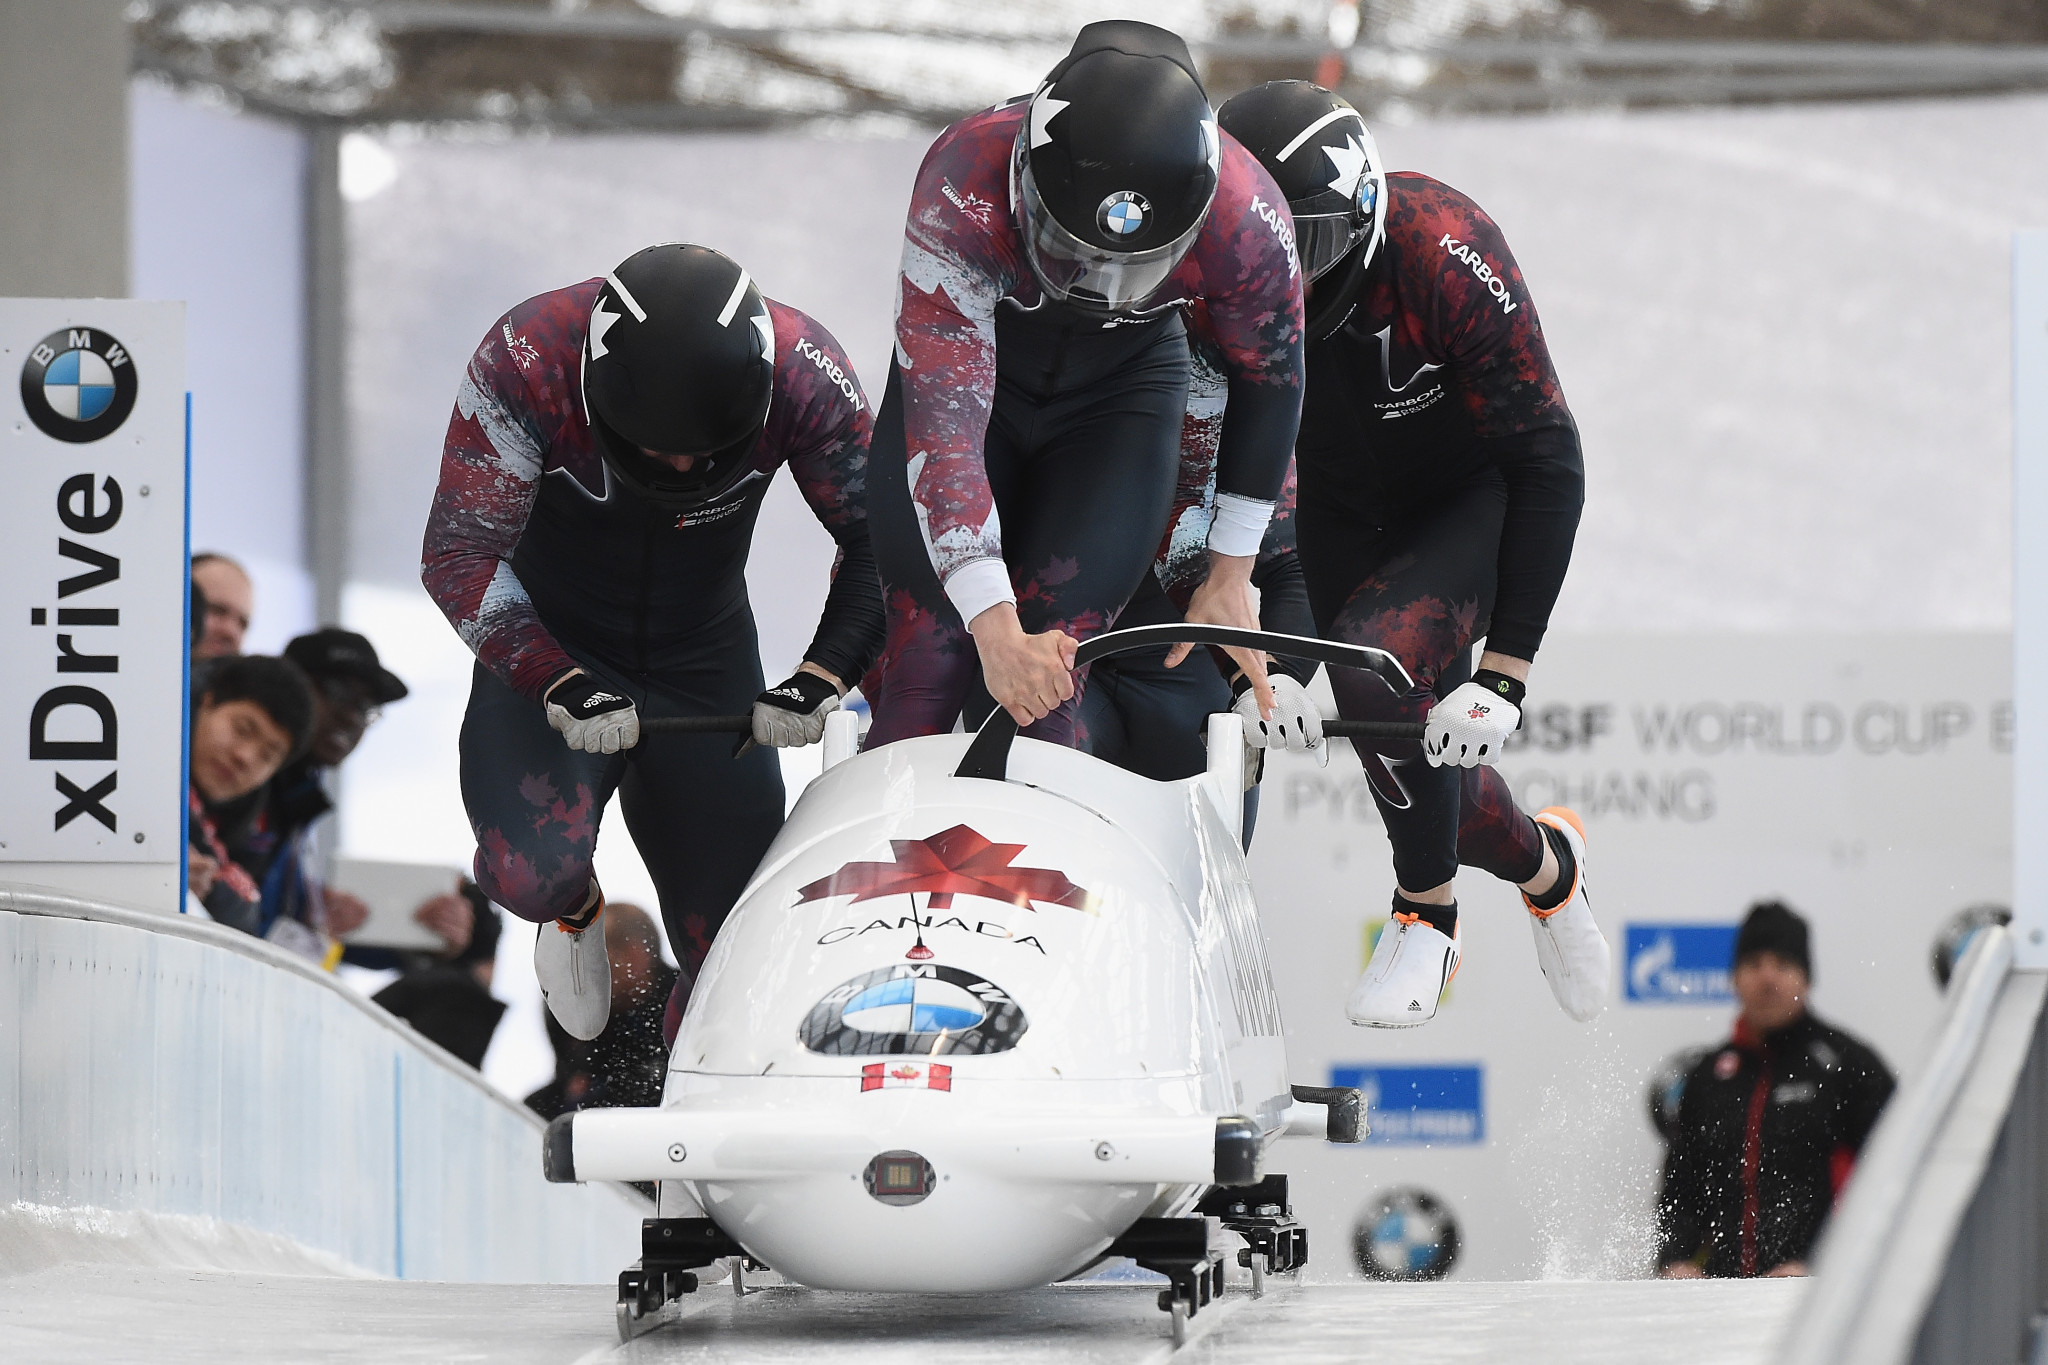 IBSF announce four-year extension to Infront Sports & Media partnership